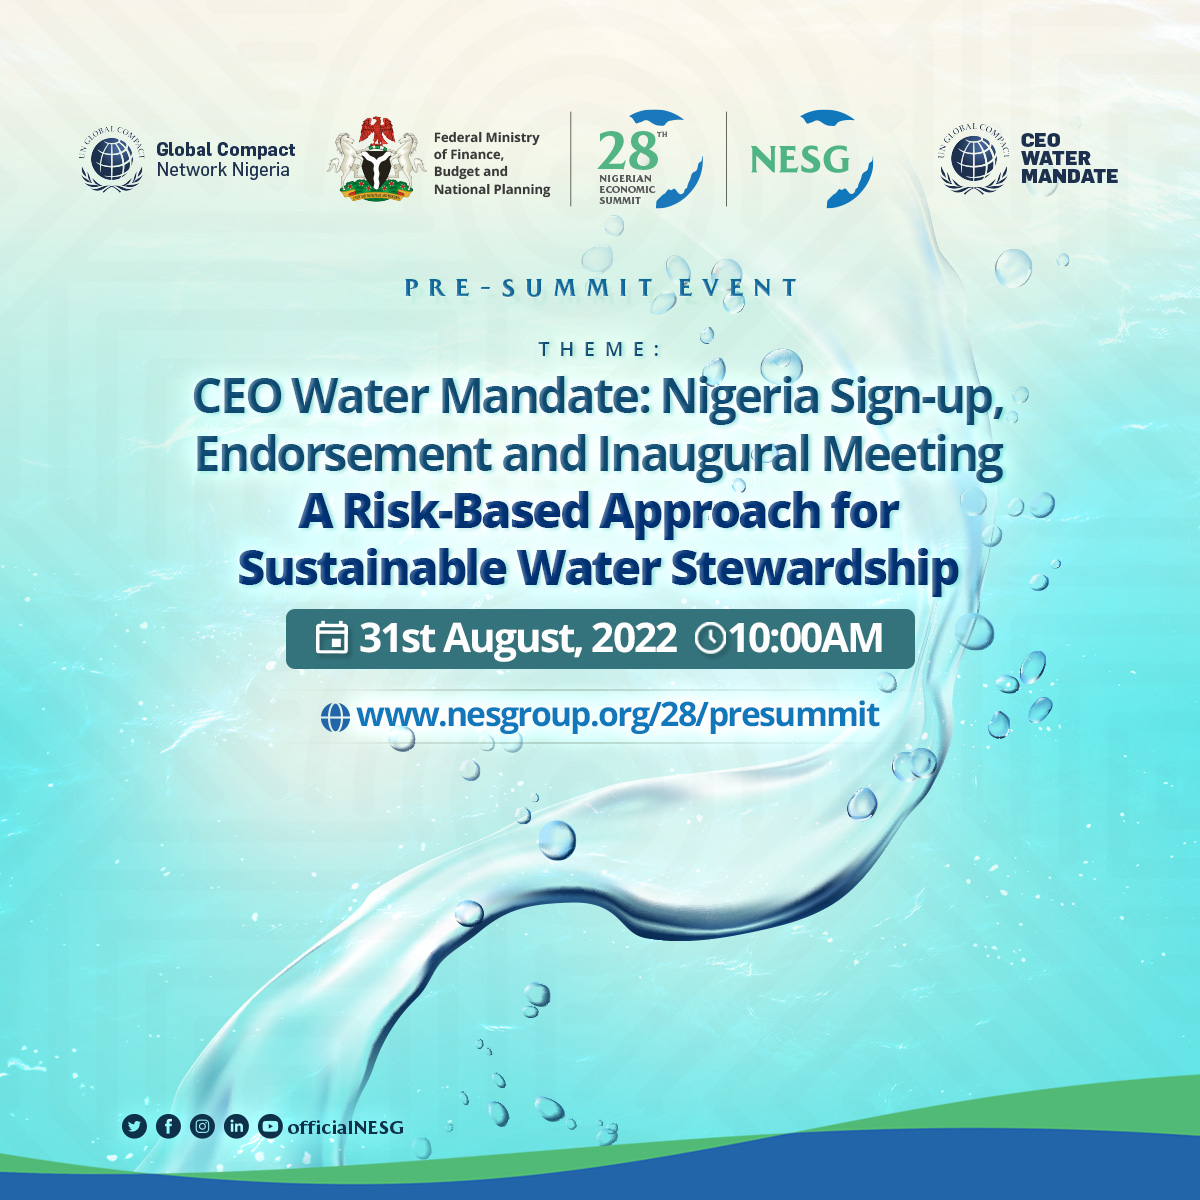 NESG, UNGC hold CEO Water Mandate Inaugural Meeting,The Nigerian Economic Summit Group, The NESG, think-tank, think, tank, nigeria, policy, nesg, africa, number one think in africa, best think in nigeria, the best think tank in africa, top 10 think tanks in nigeria, think tank nigeria, economy, business, PPD, public, private, dialogue, Nigeria, Nigeria PPD, NIGERIA, PPD, The Nigerian Economic Summit Group